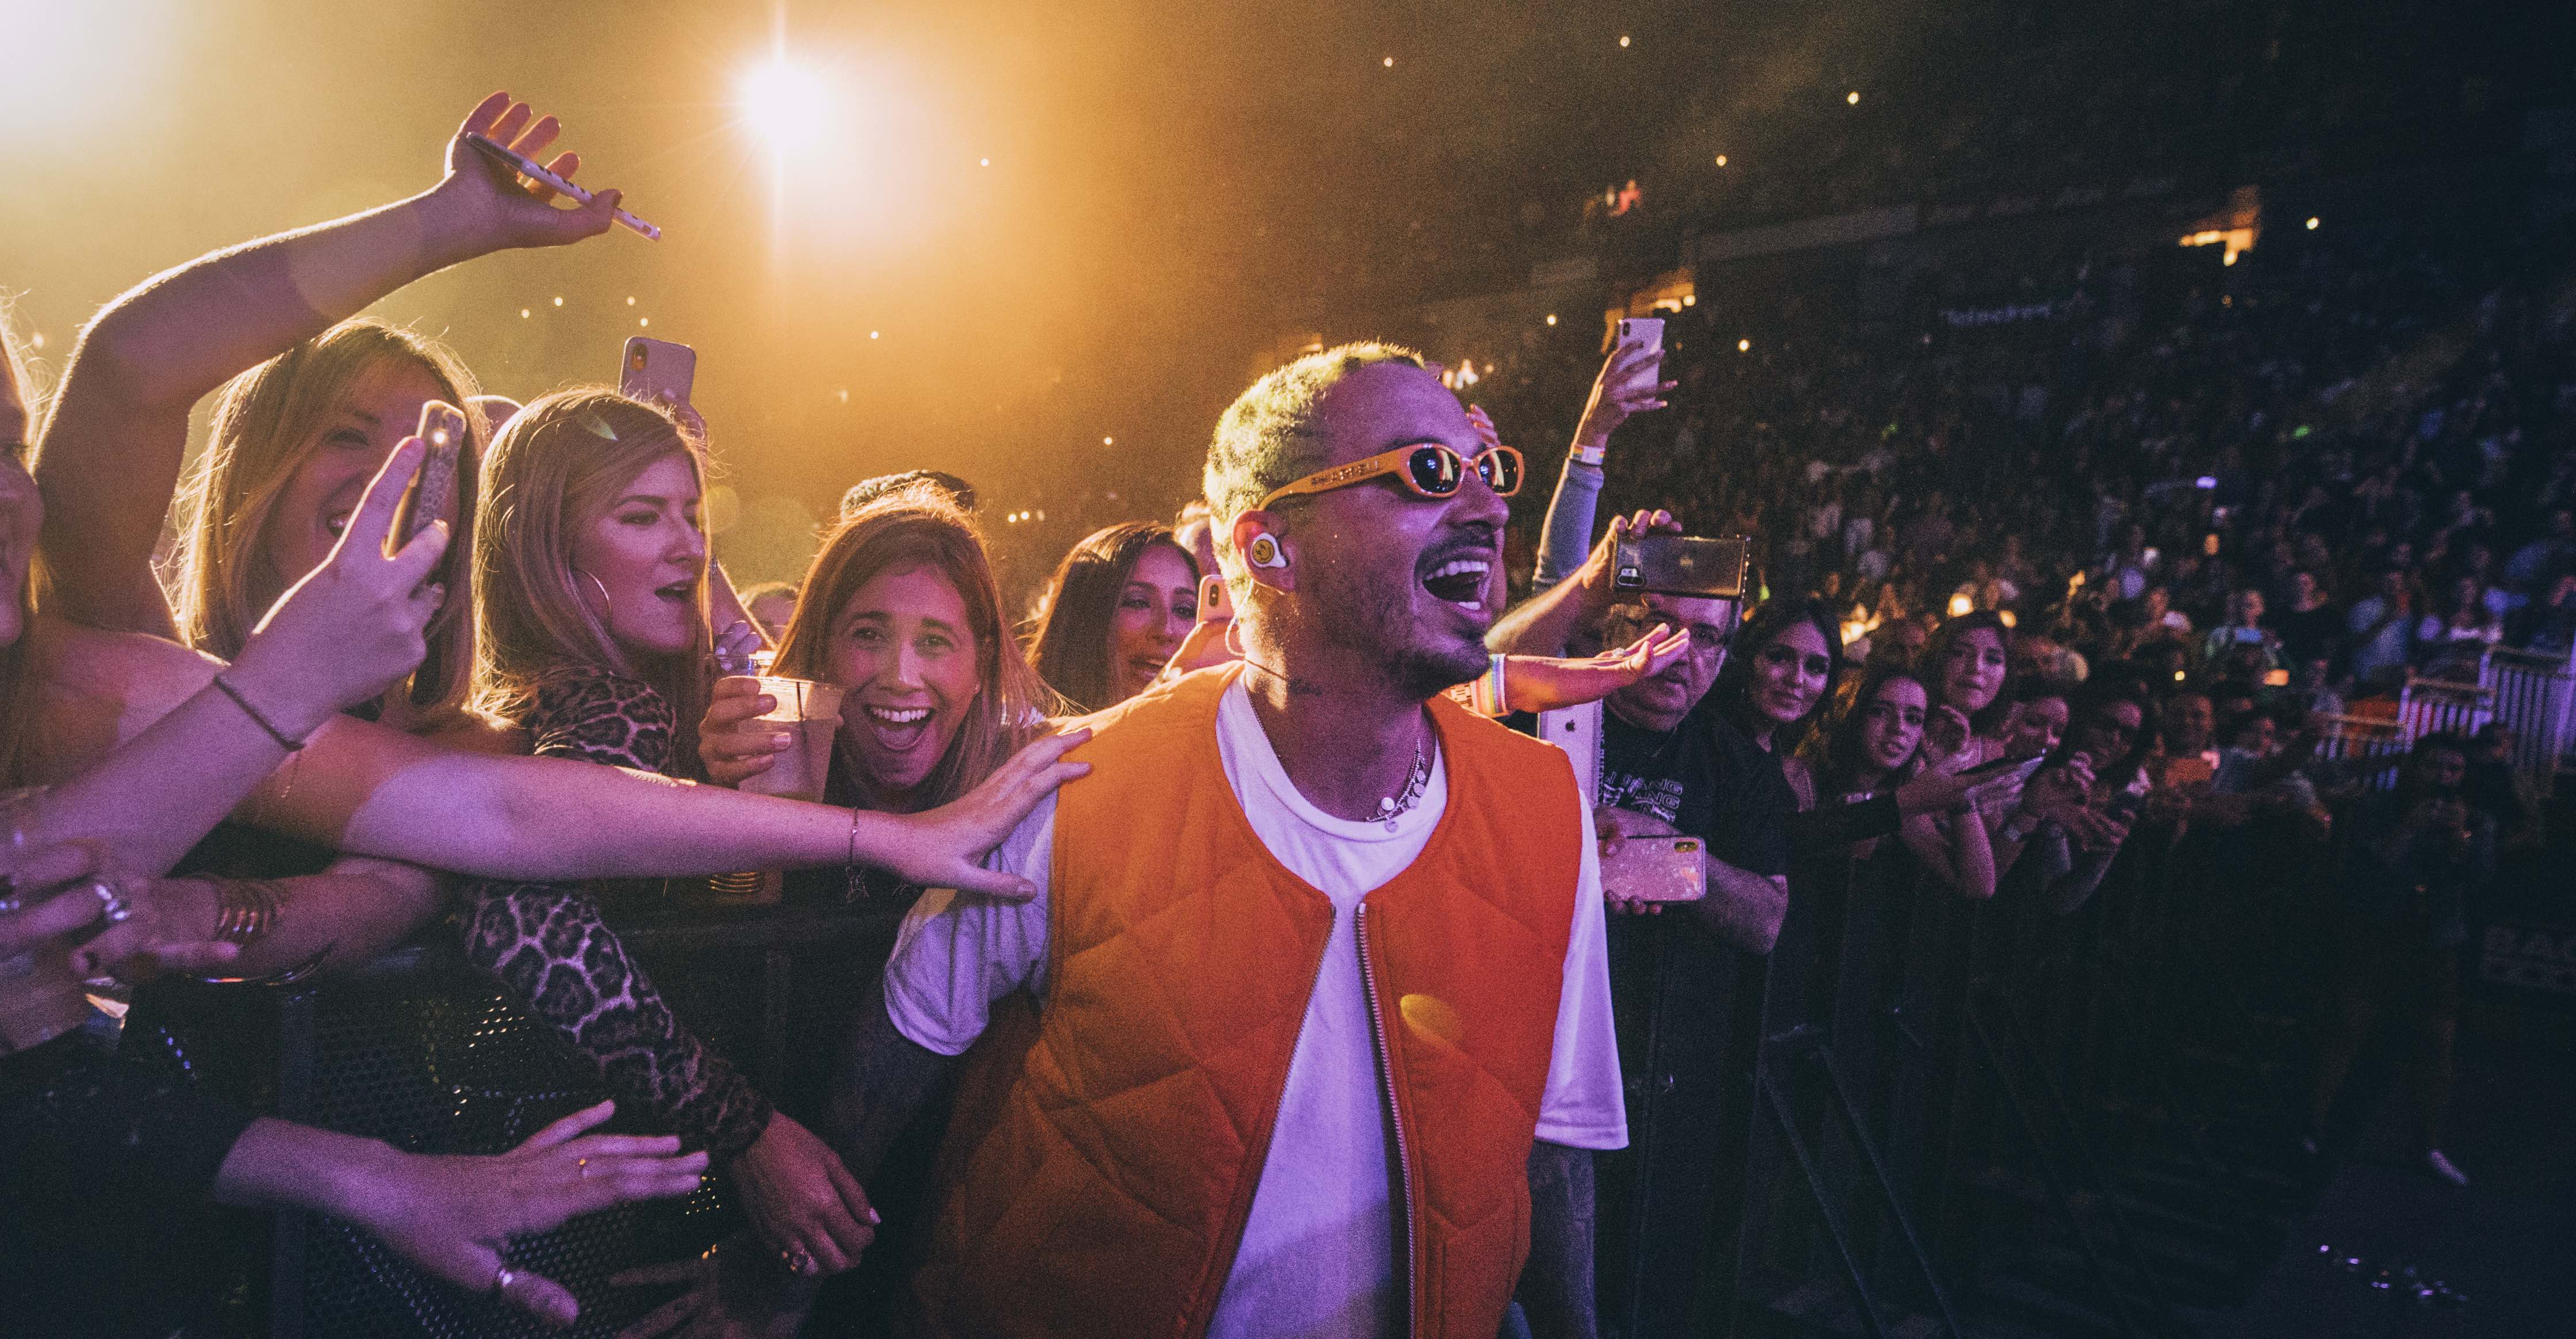 J Balvin's Breaks Records in Puerto Rico With His Stunning 'Arcoiris' Tour